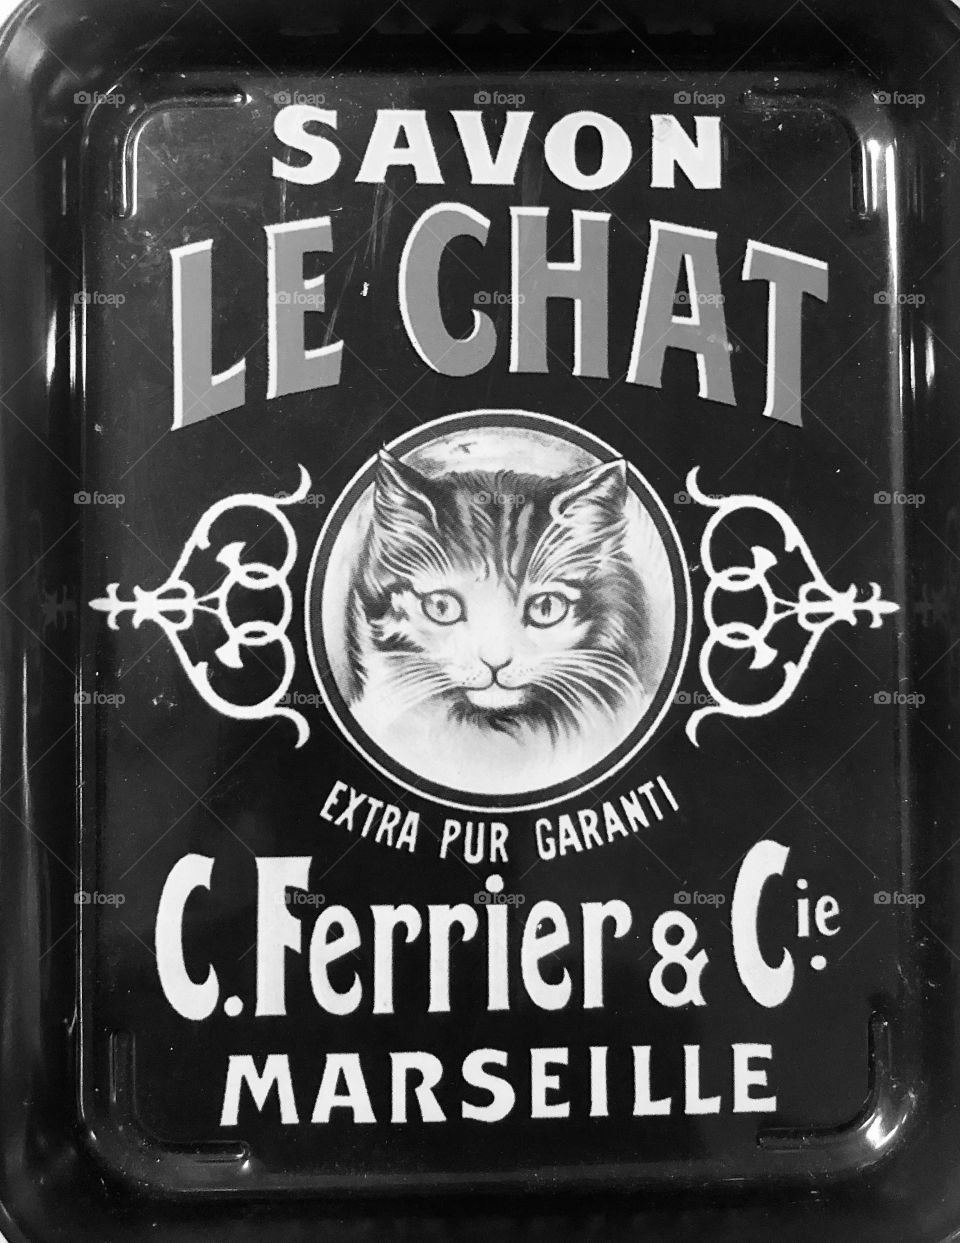 Savon le chat reclame black and white poster 